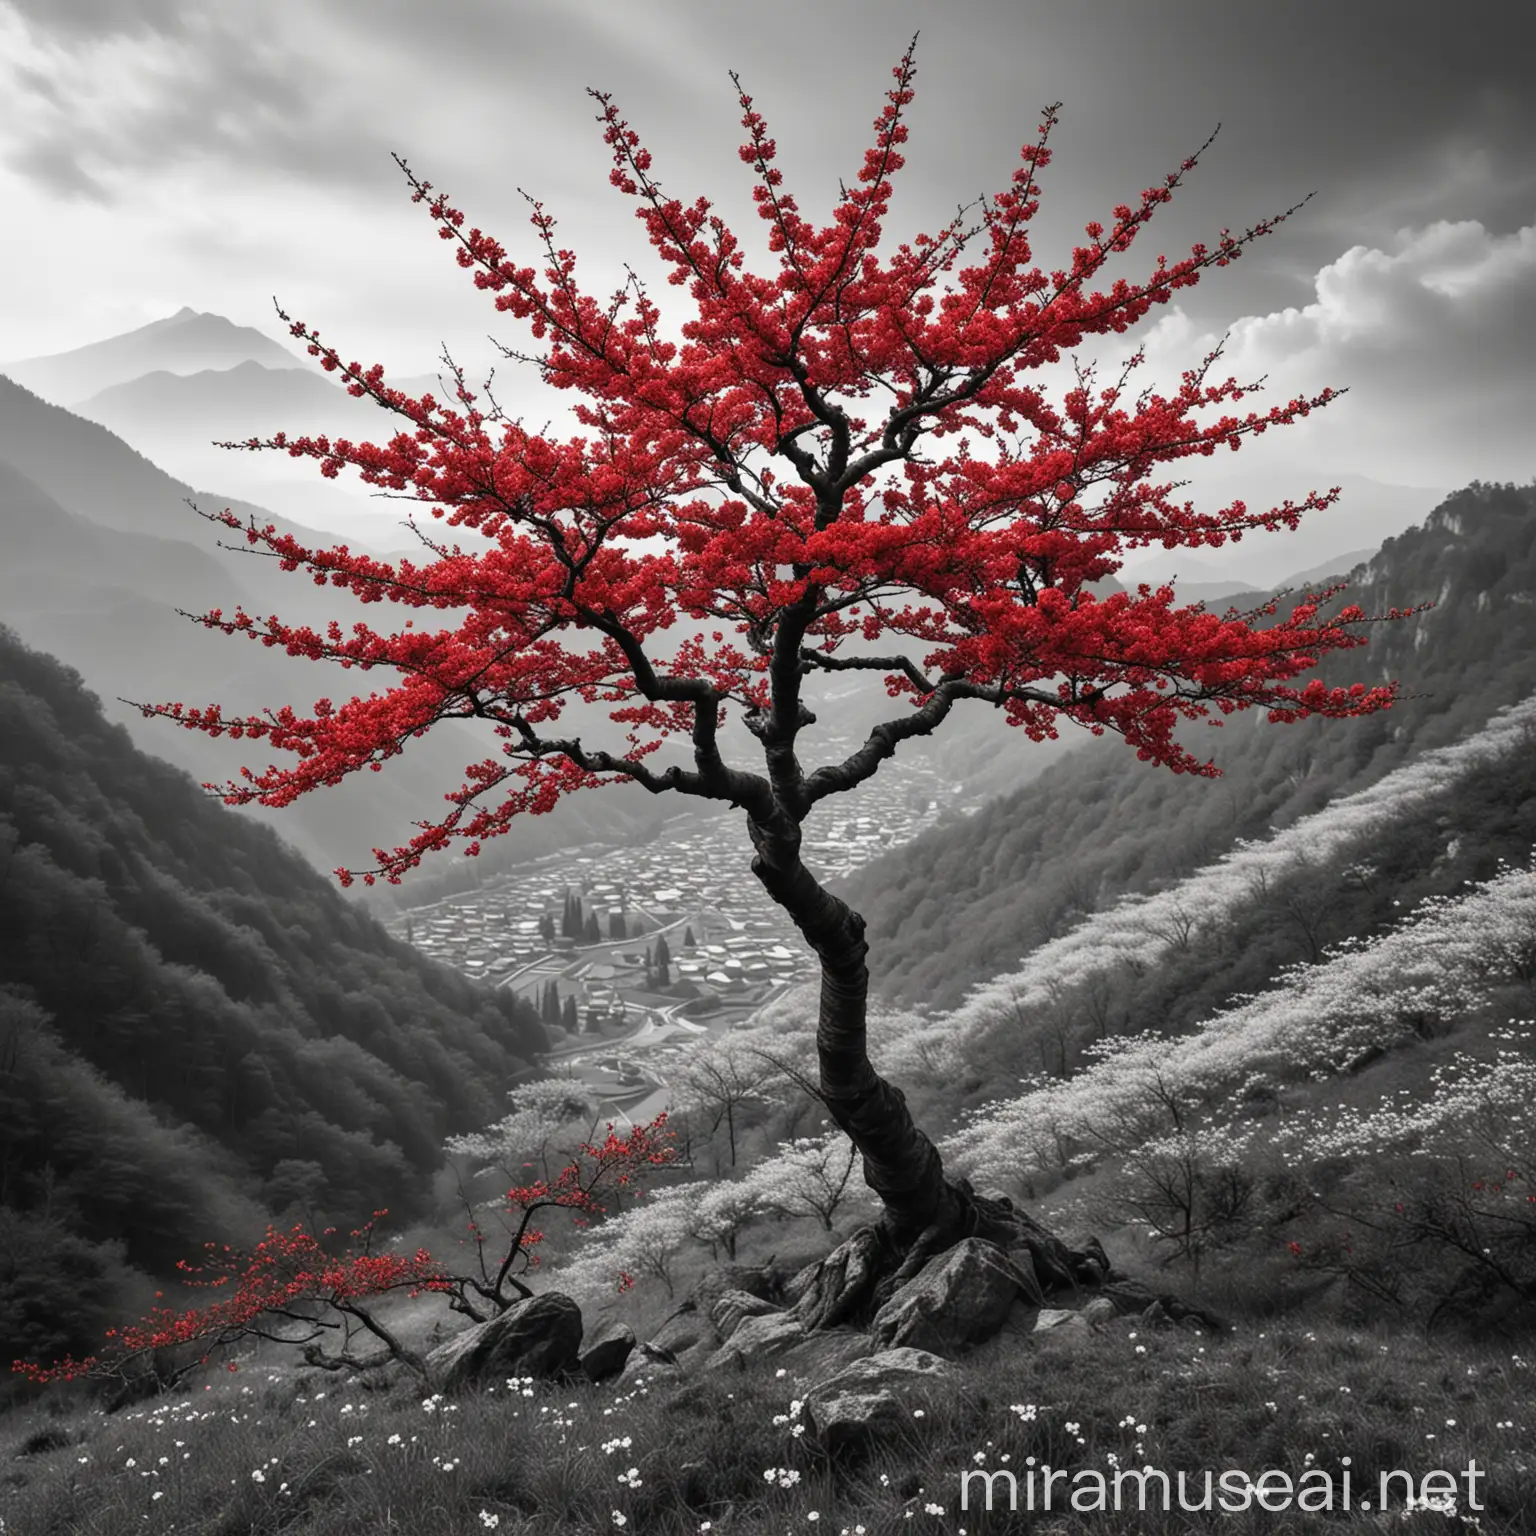 a red charry blossom tree in a greyscale mountain valley
